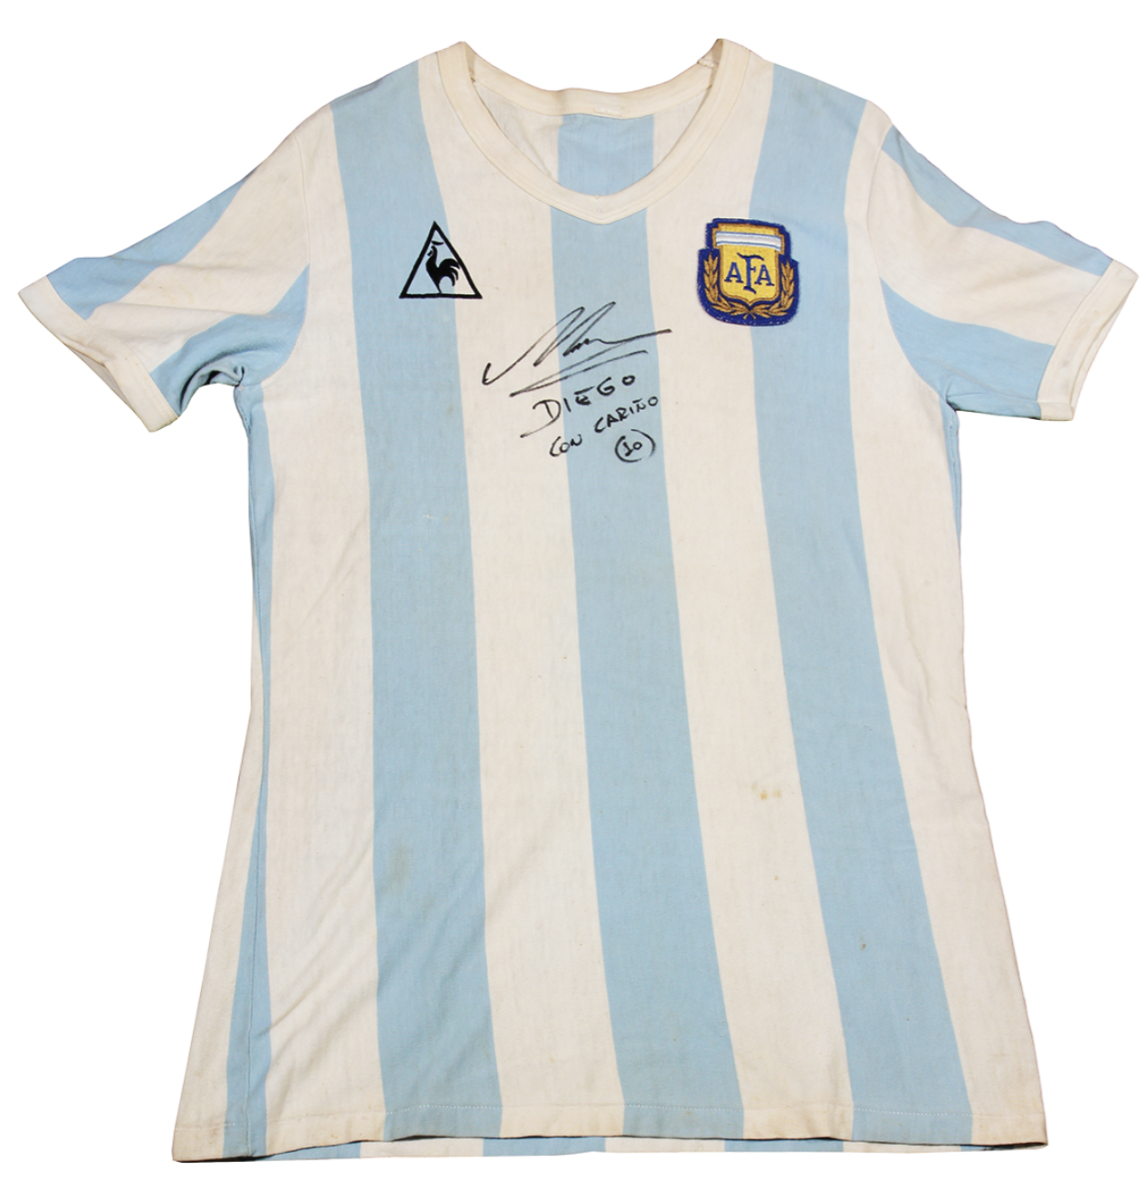 Diego Maradona’s 1982 World Cup match-worn, signed jersey from his World Cup debut against Belgium on June 13, 1982.